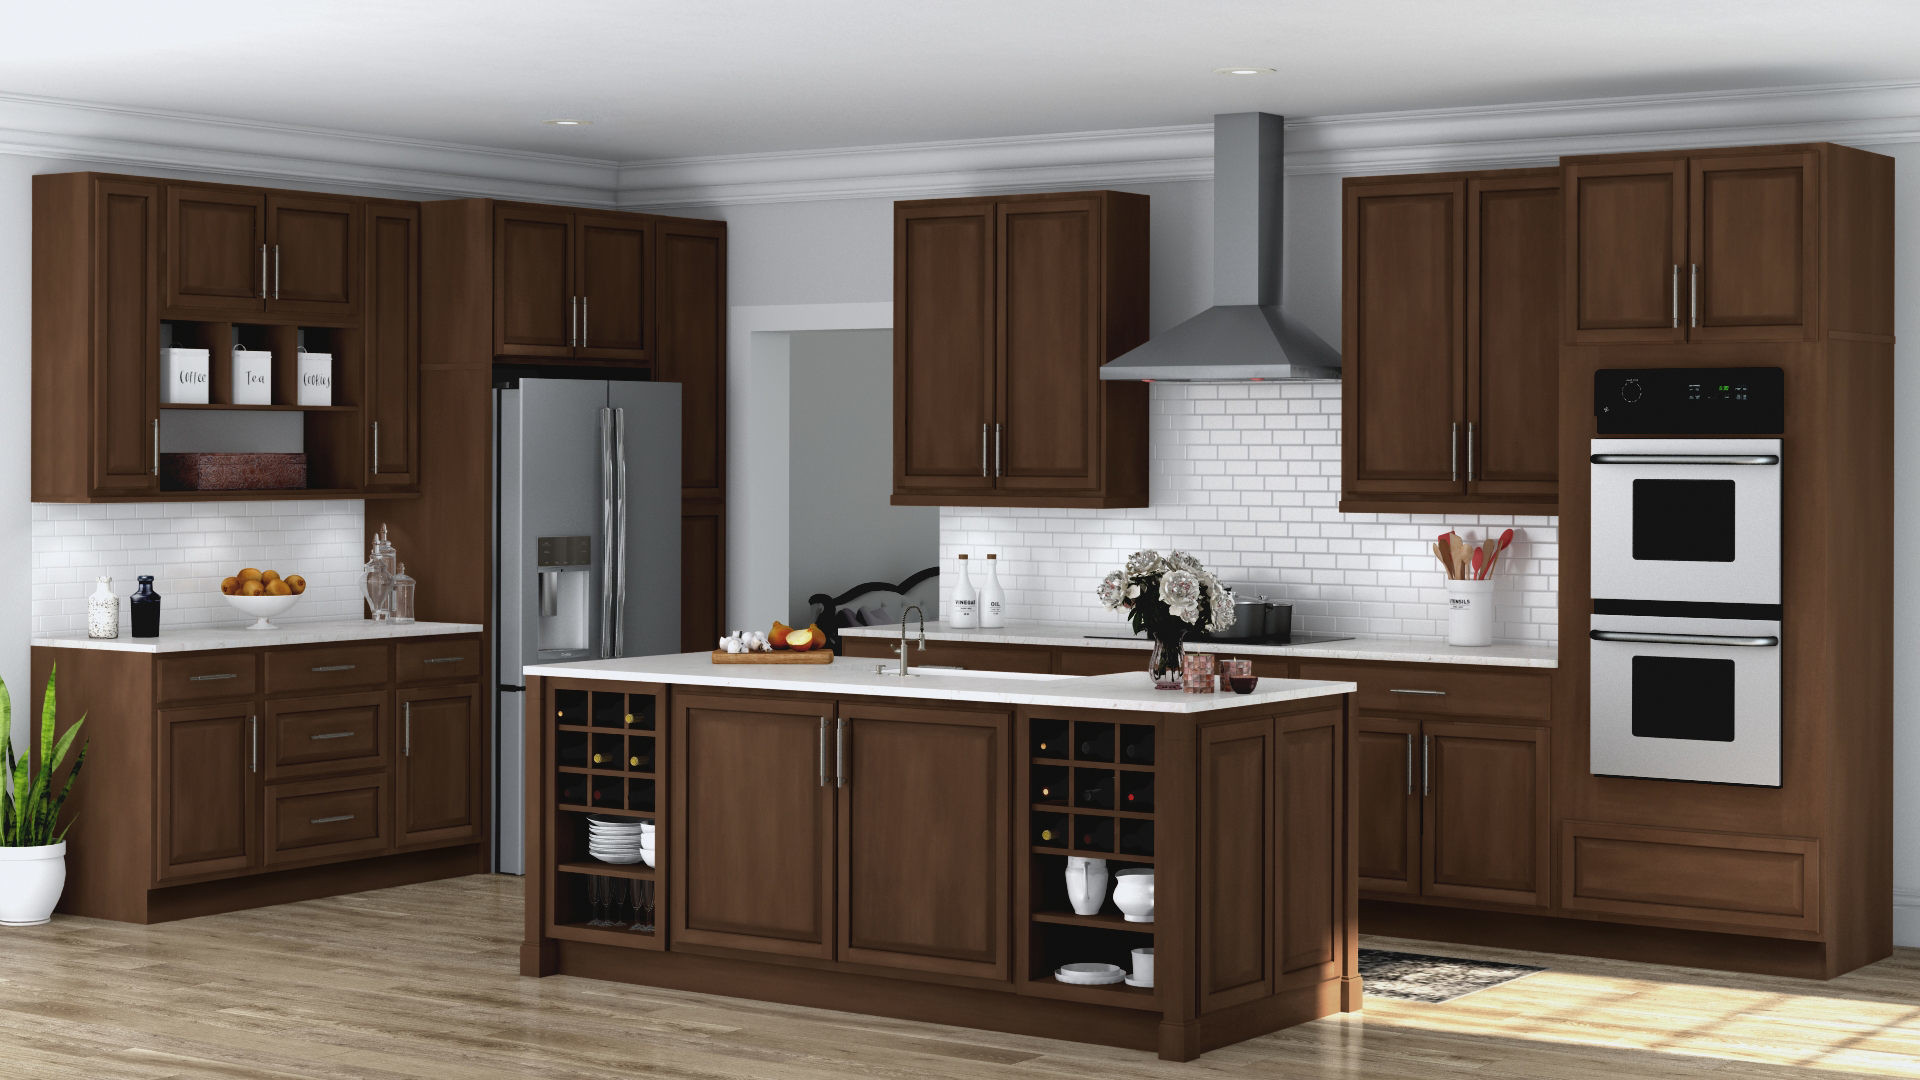 Home Depot Kitchen Cabinet
 Hampton Wall Kitchen Cabinets in Cognac – Kitchen – The